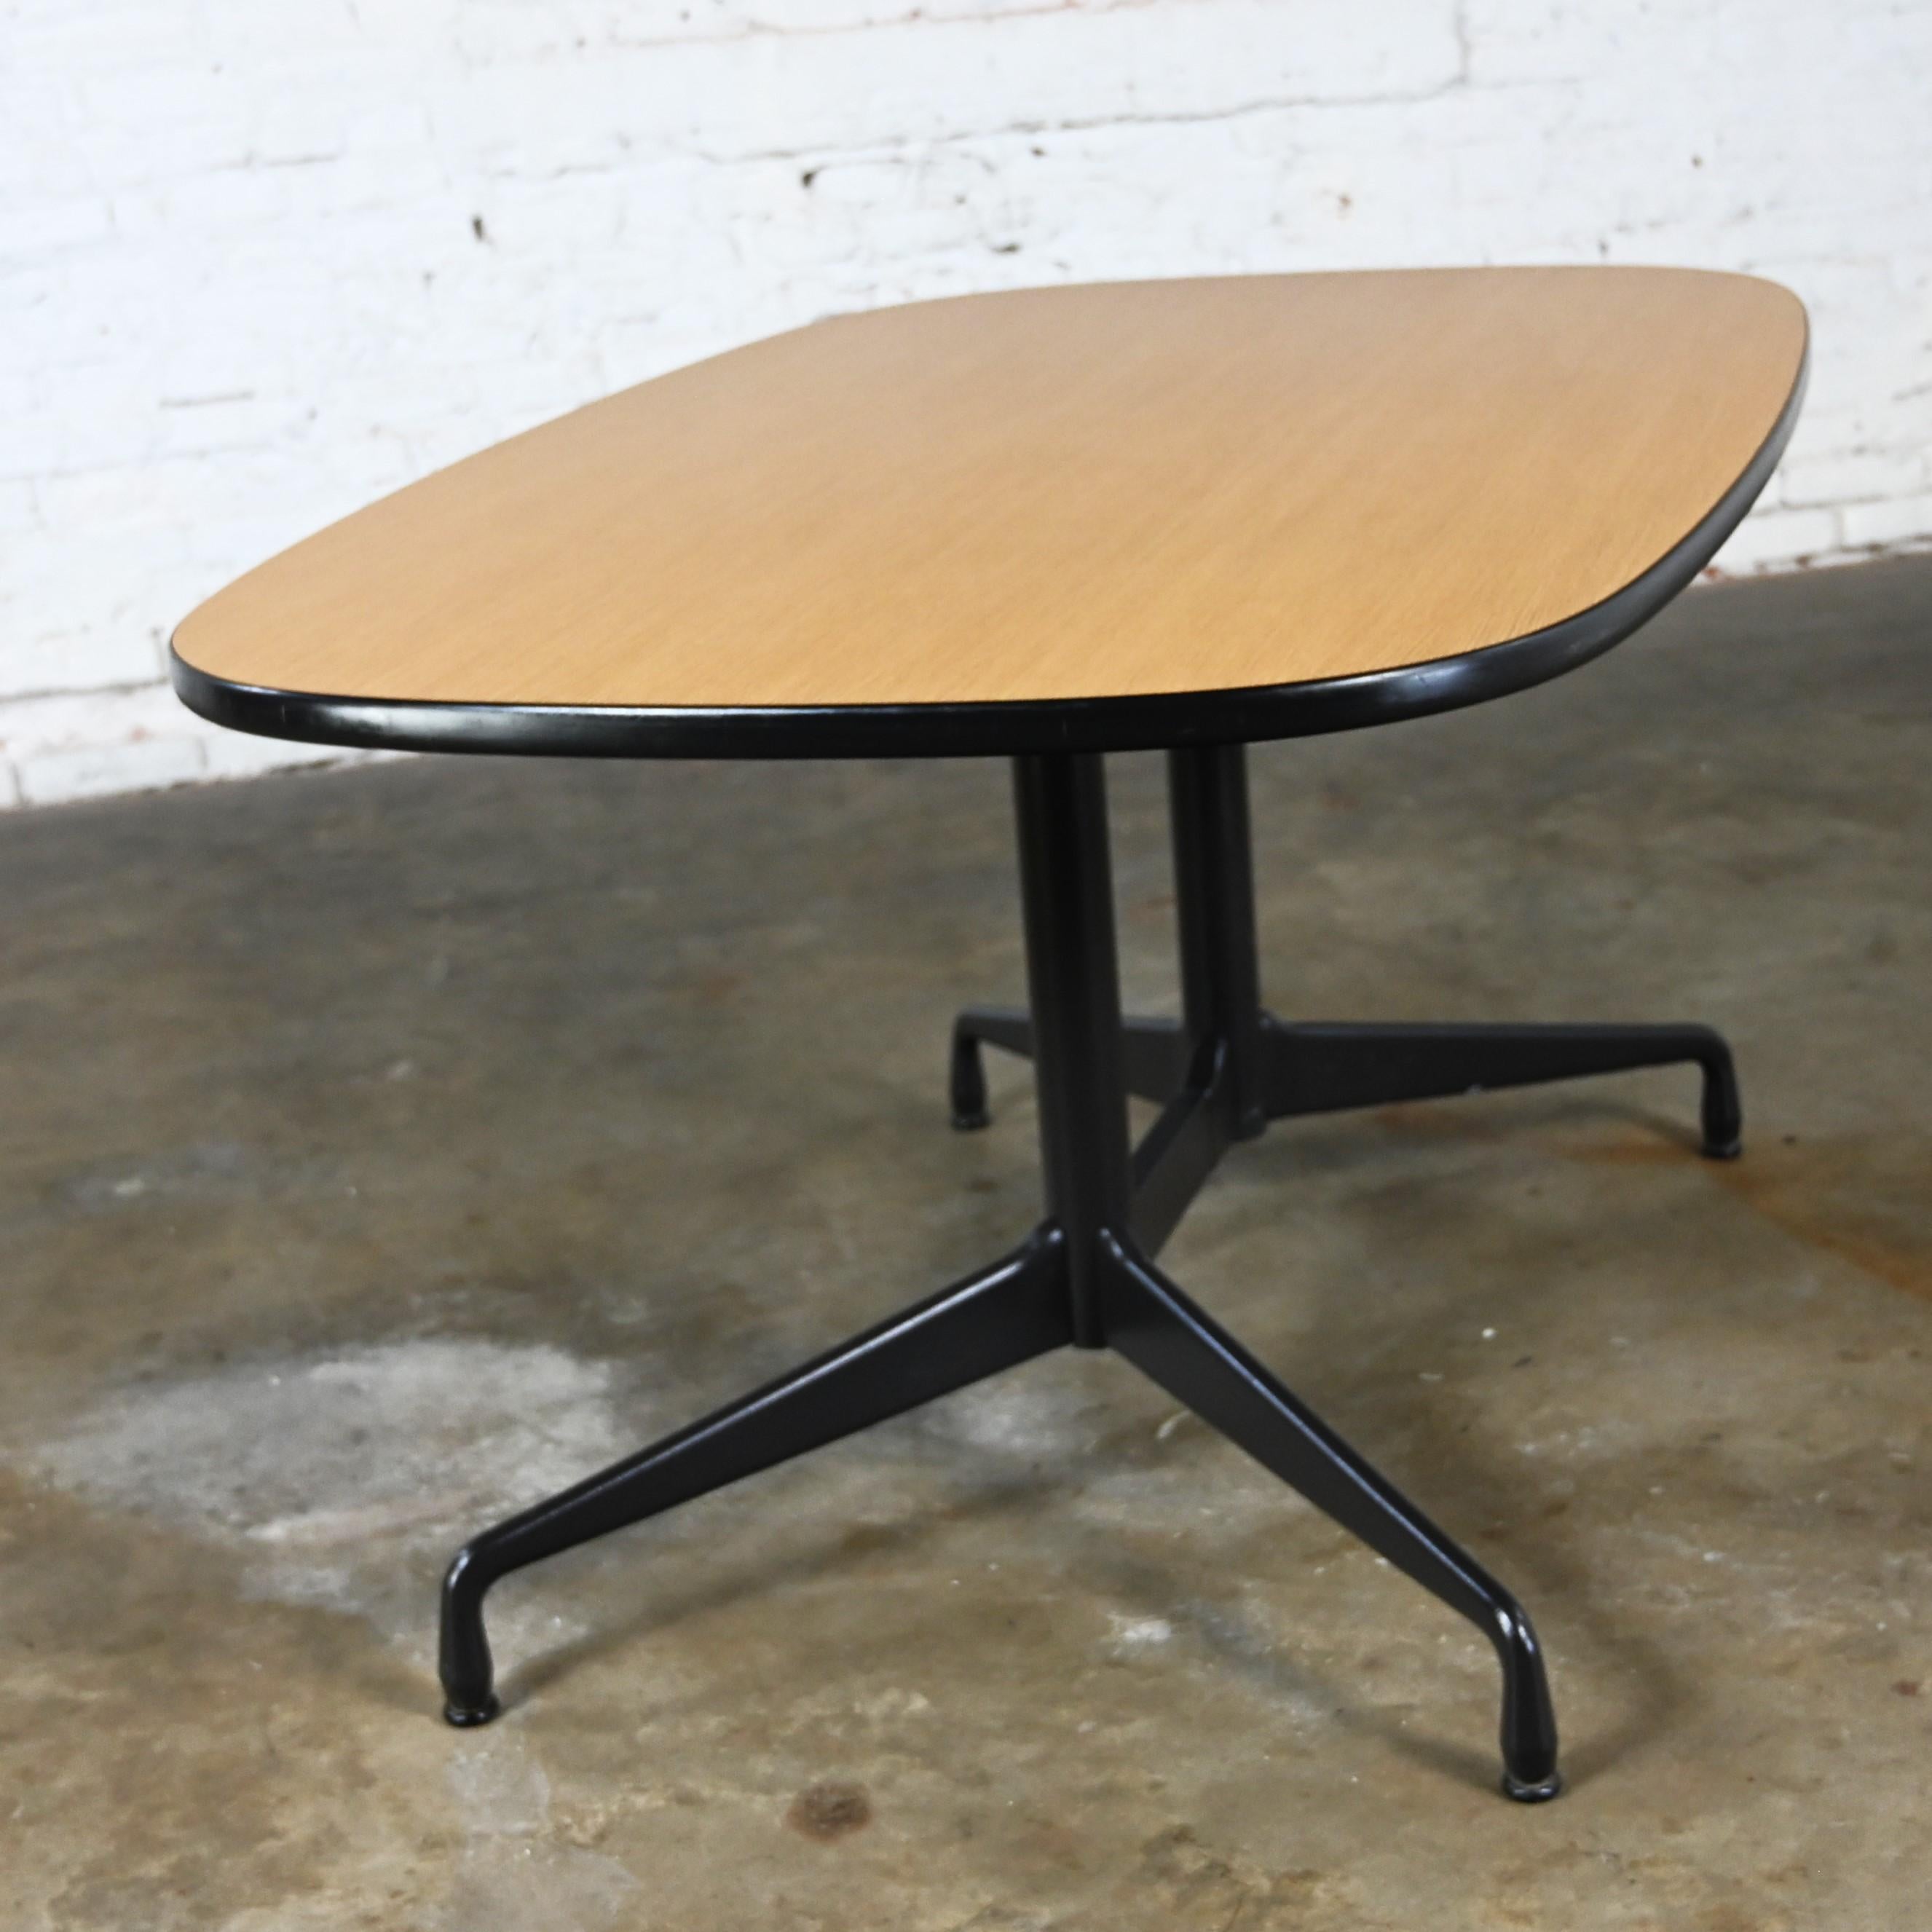 20th Century Eames Herman Miller Oval Conference Dining Table Universal Segmented Laminate #2 For Sale